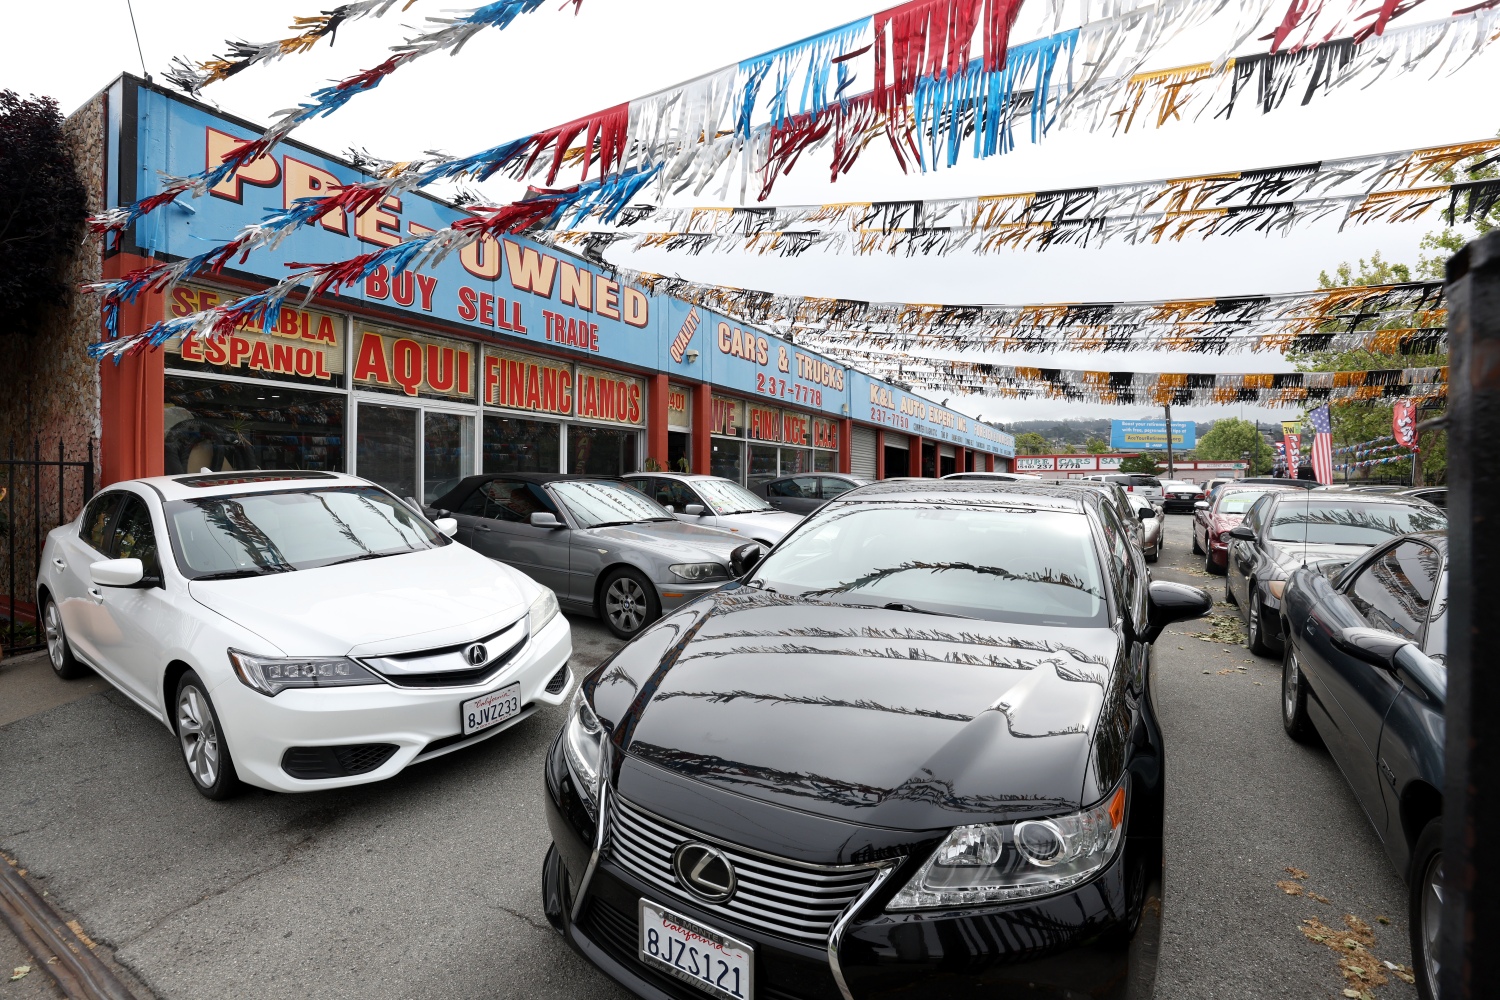 Buying a used car like these options at a dealership